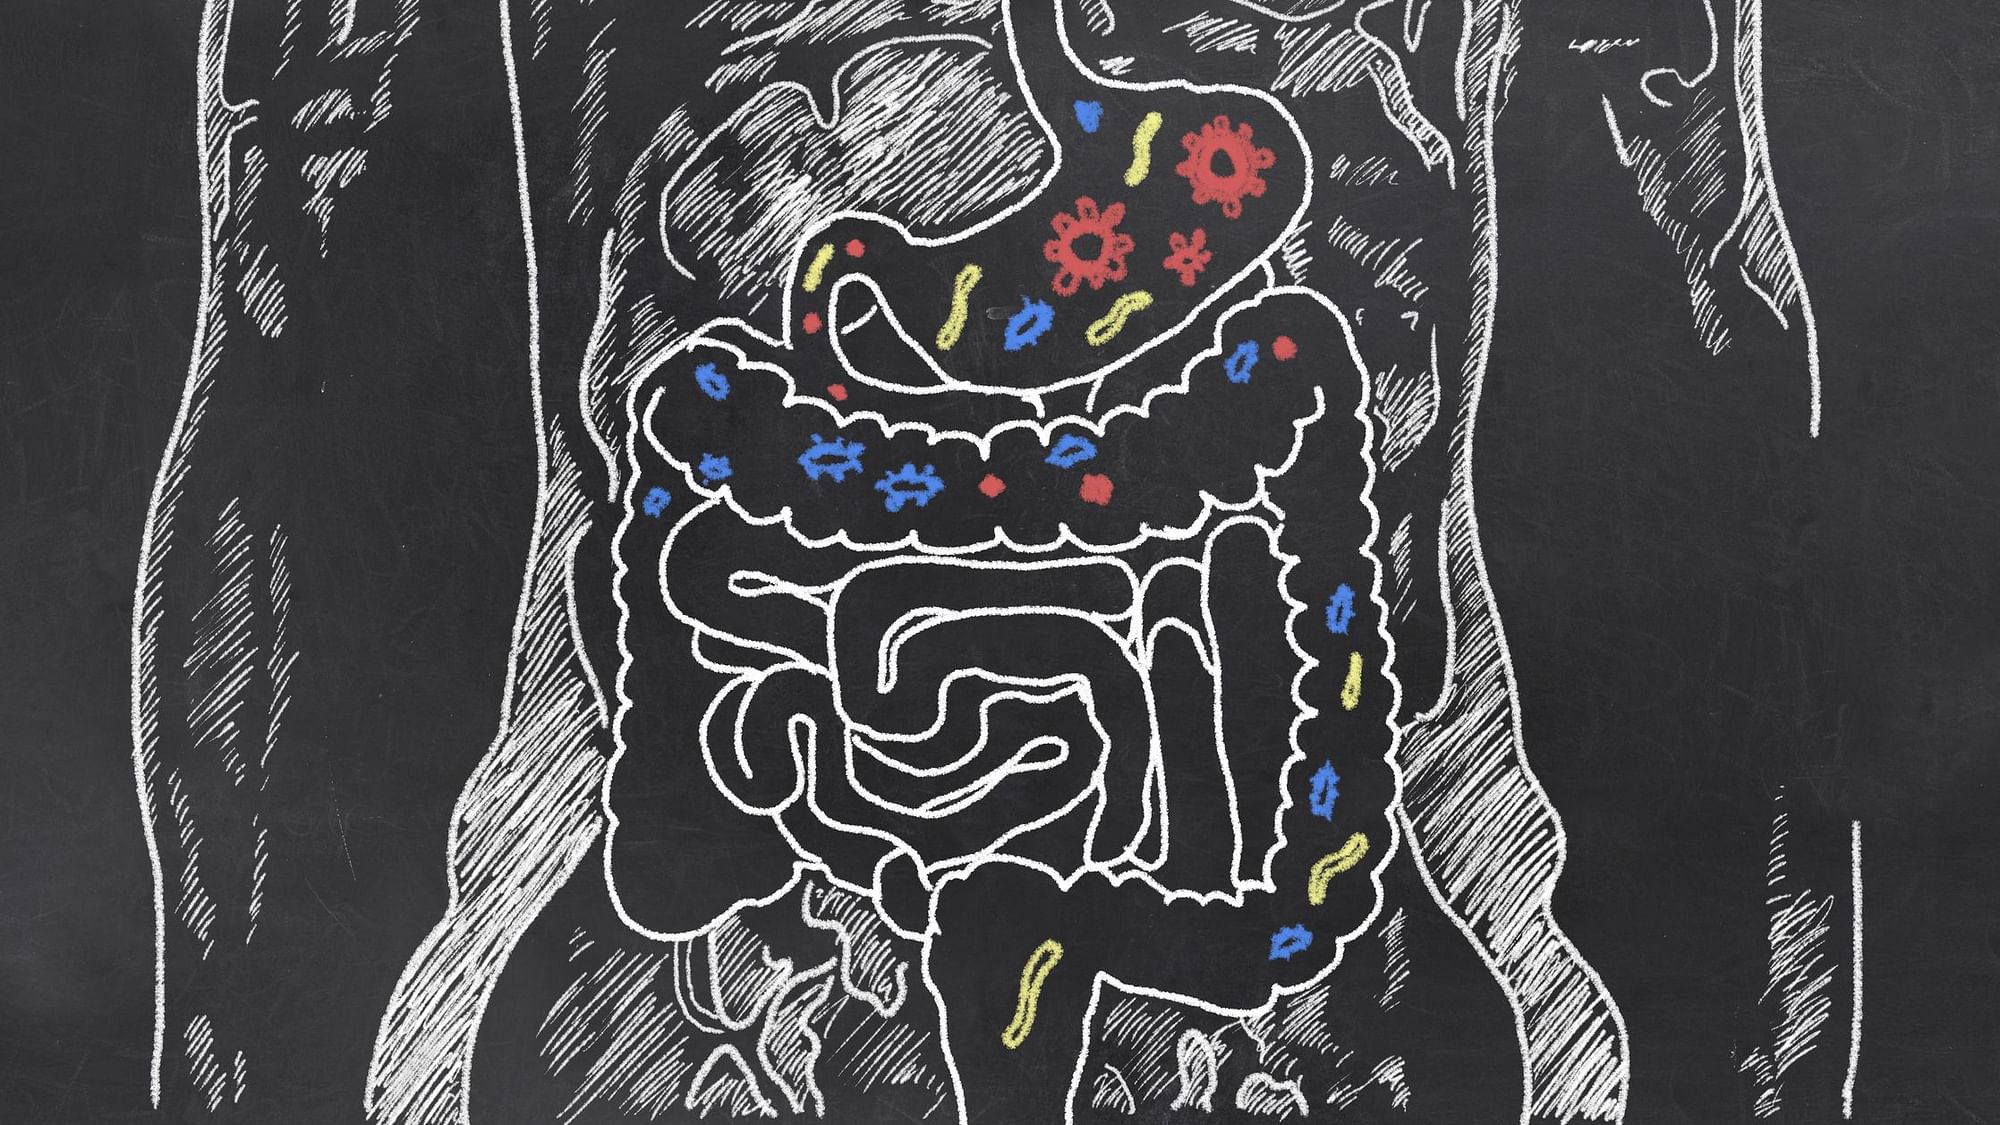 The discovery shows that gut microbes can compensate and support an ageing body through positive stimulation.